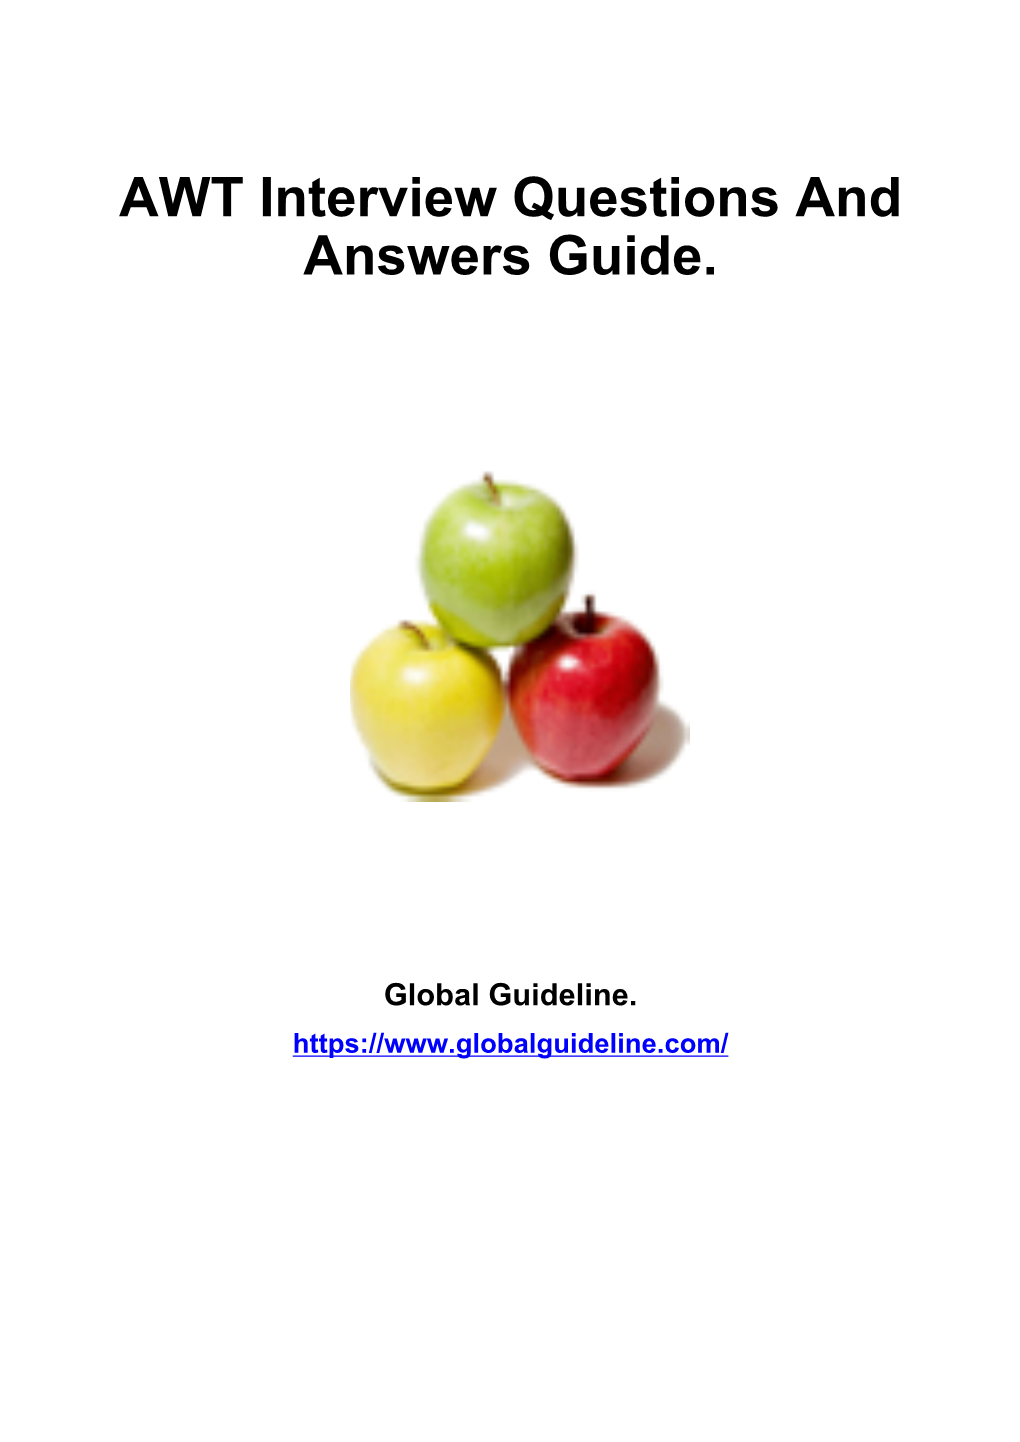 AWT Interview Questions and Answers Guide